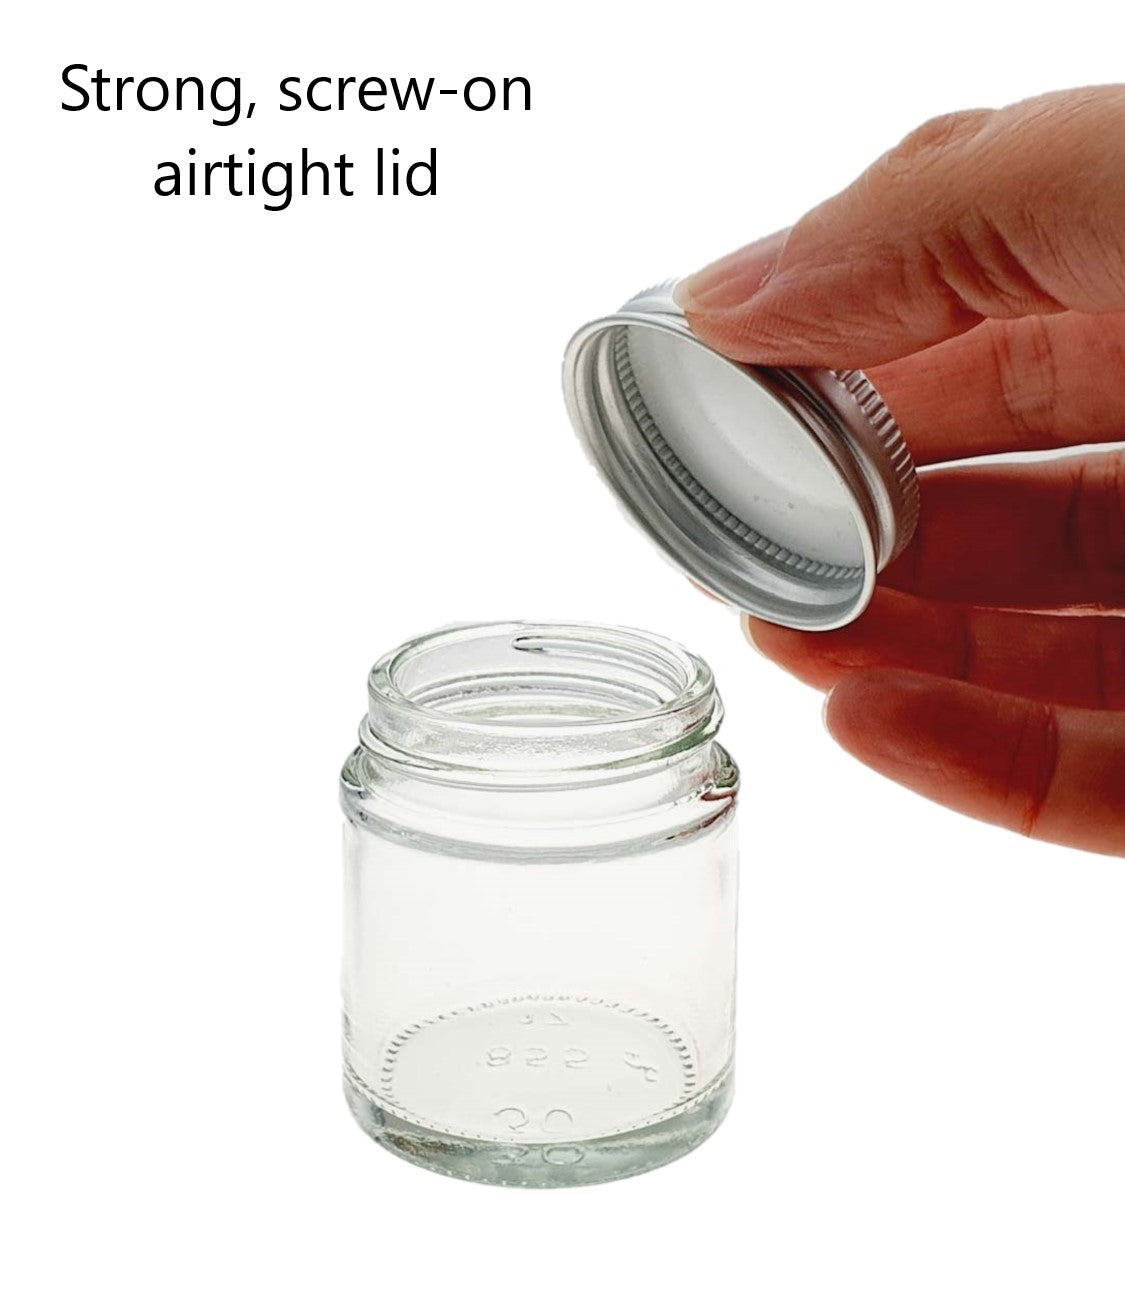 30ml Clear Glass Jar with Brushed Aluminum Lid